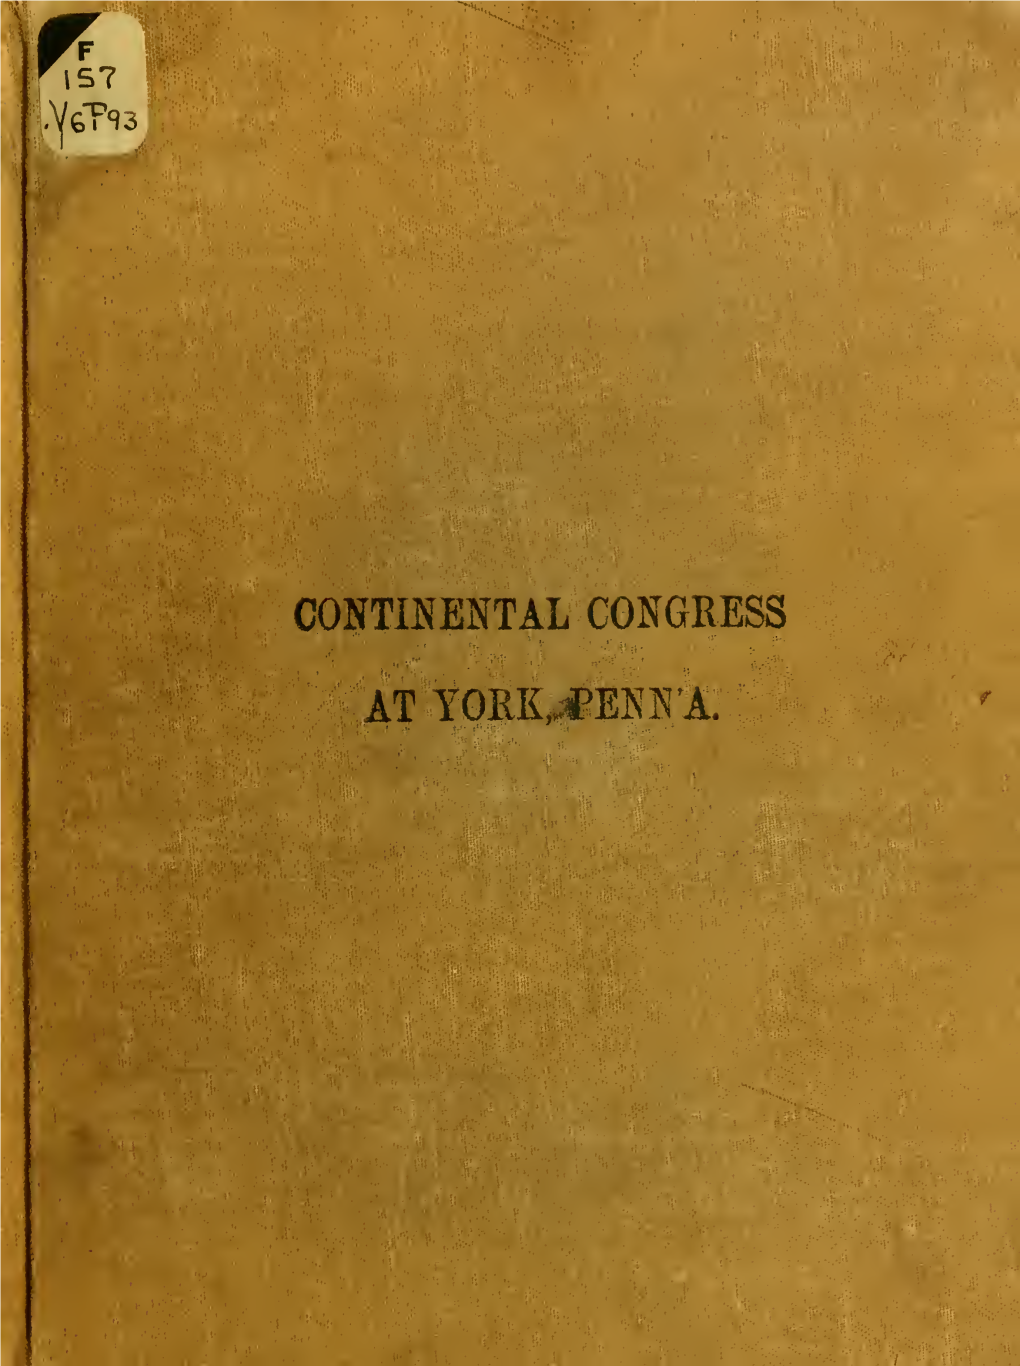 Continental Congress at York, Pennsylvania and York County in the Revolution